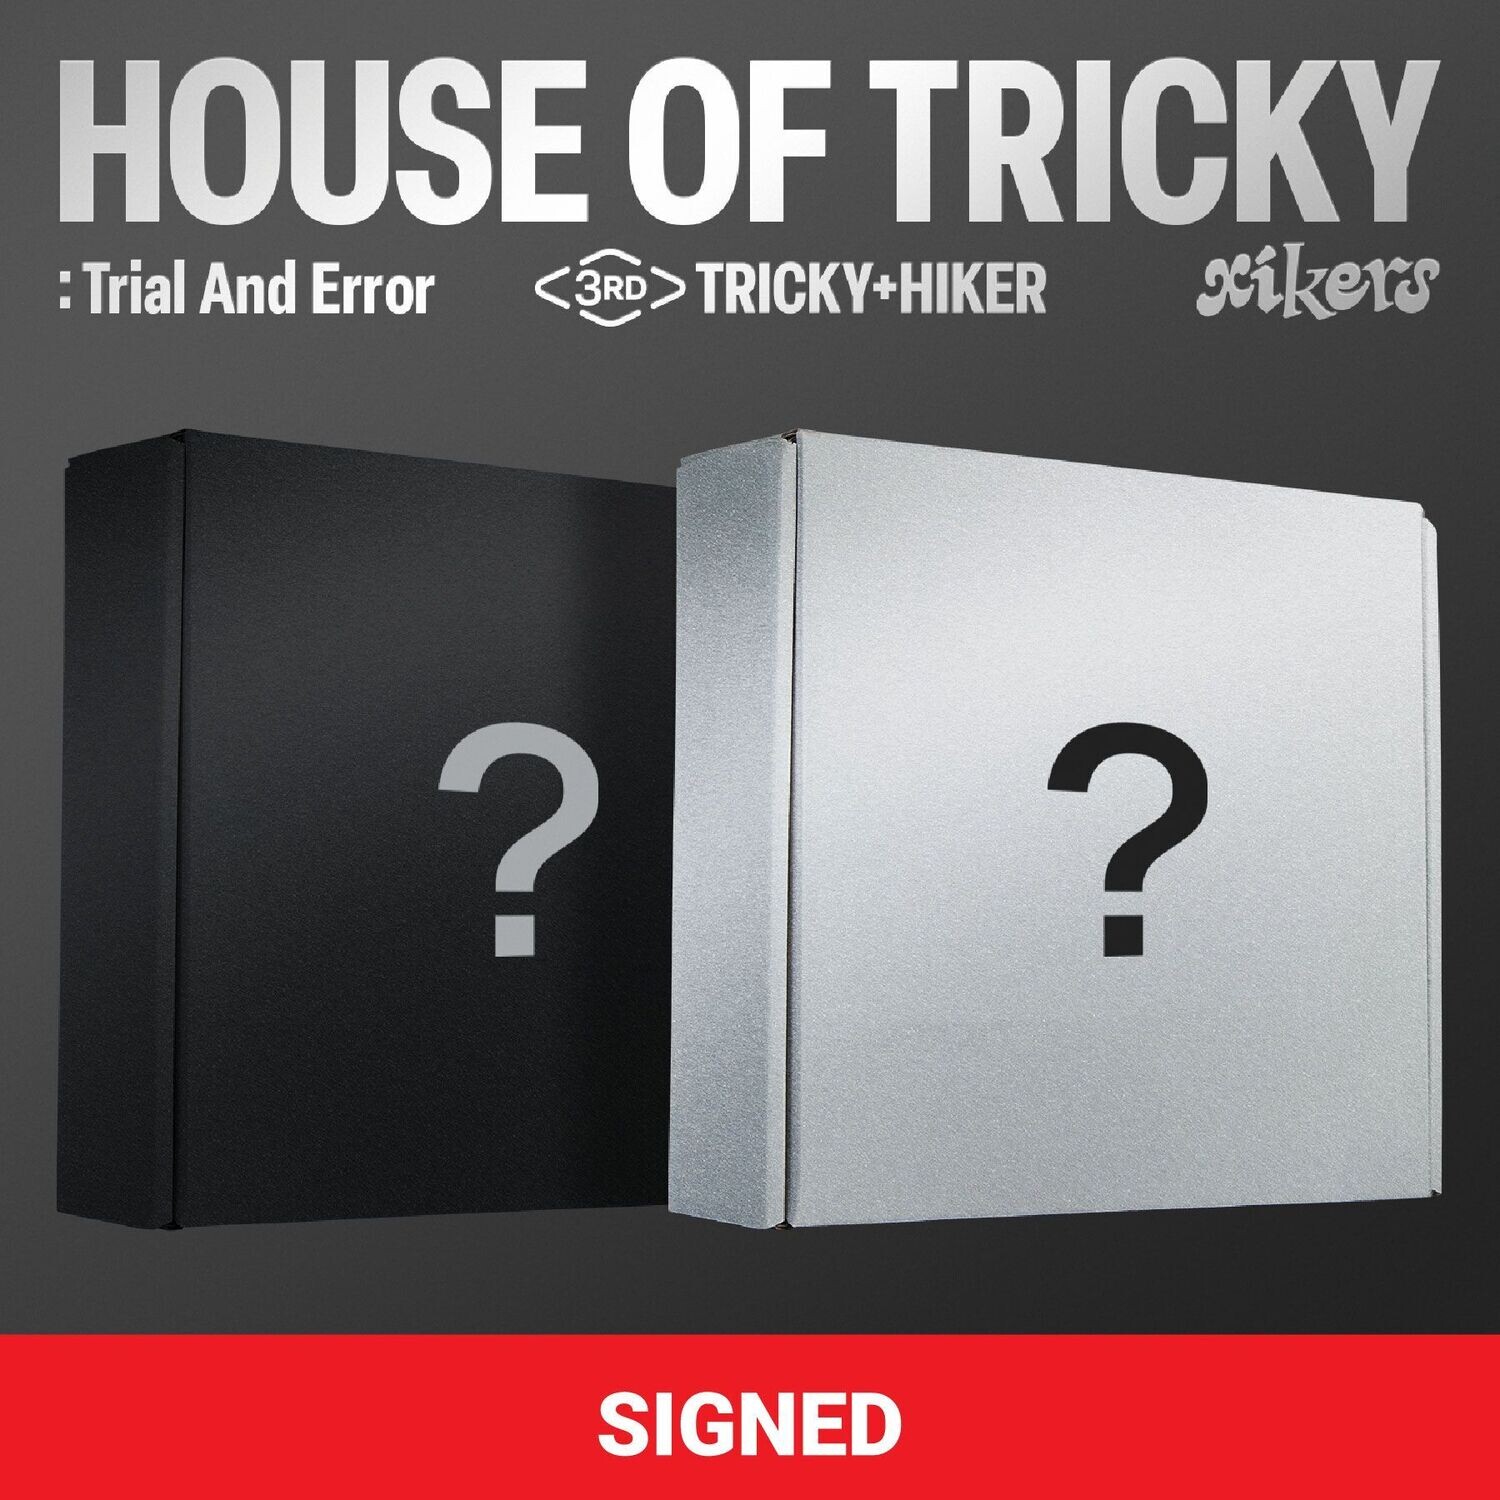 [Signiert] xikers - House Of Tricky: Trial and Error (3. Mini Album), Version: Hiker Ver. (silver)